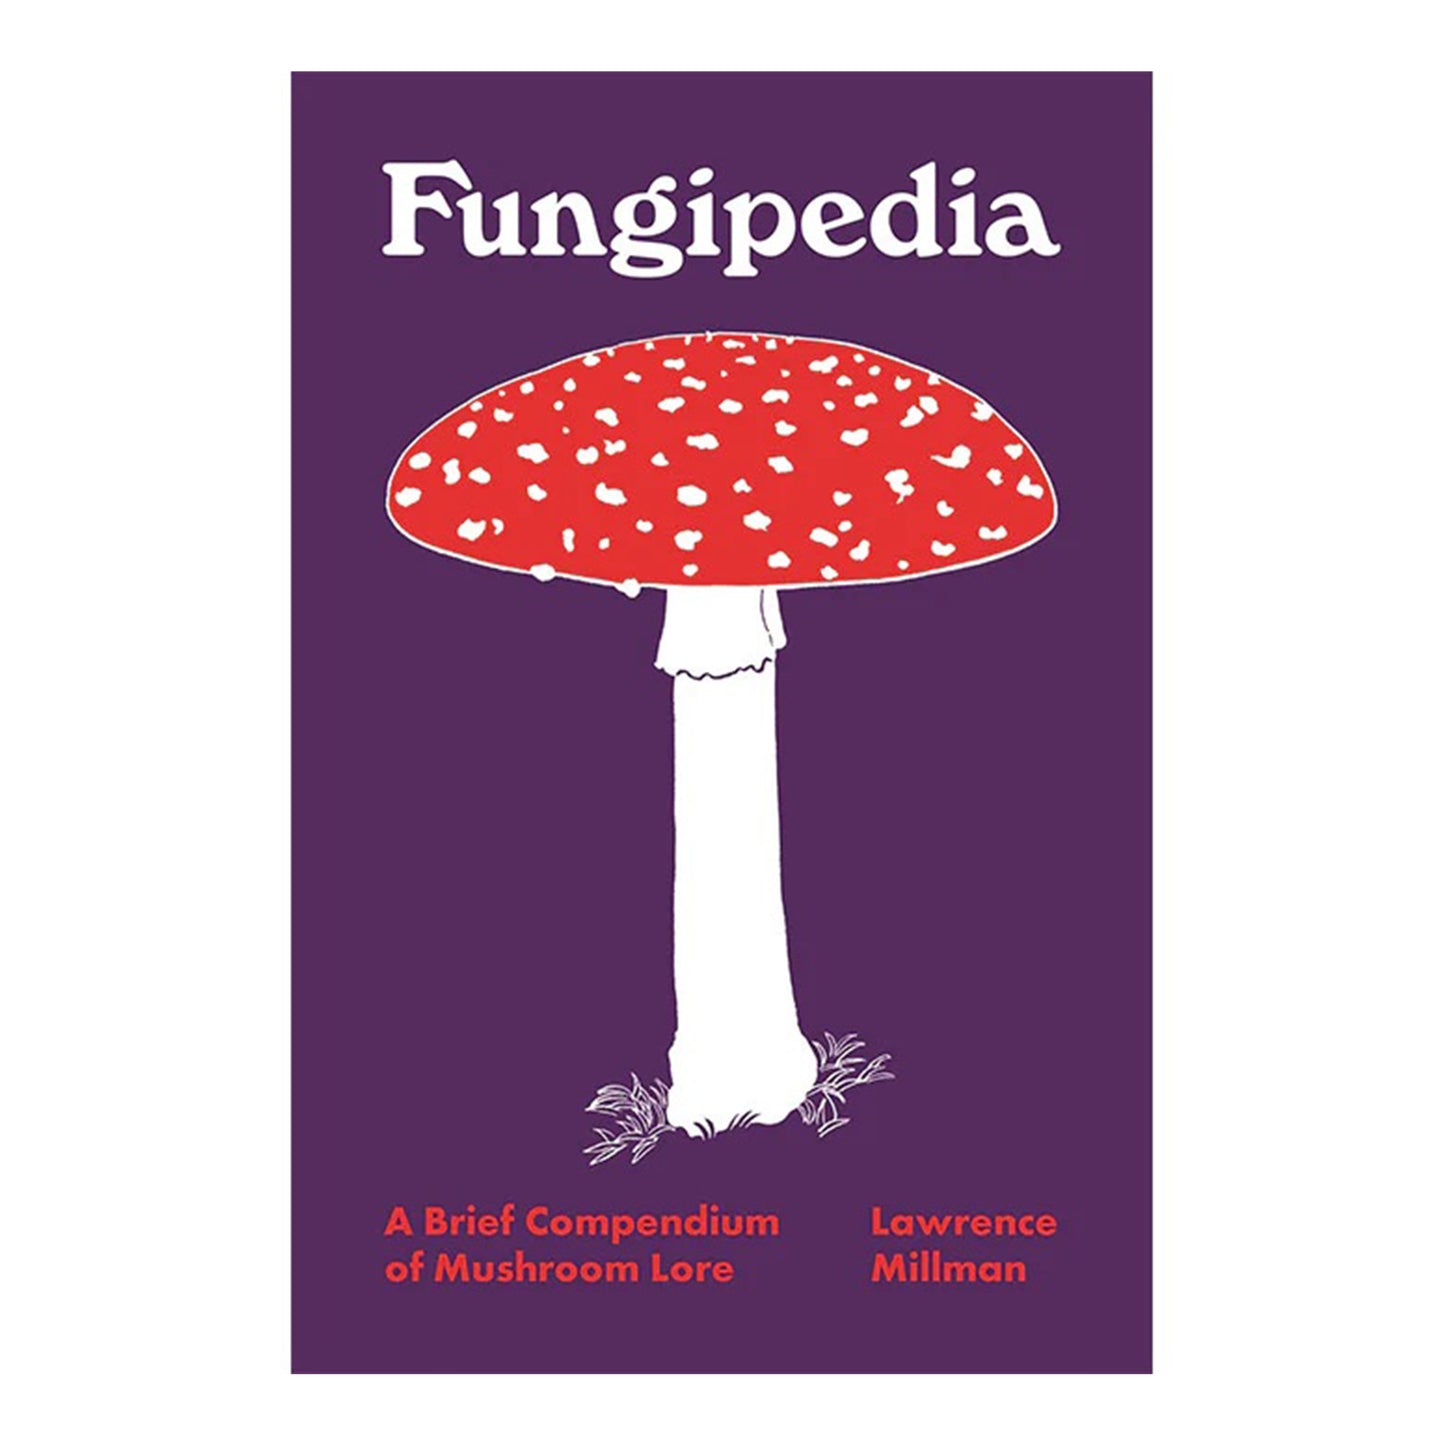 Fungipedia by Lawrence Millman